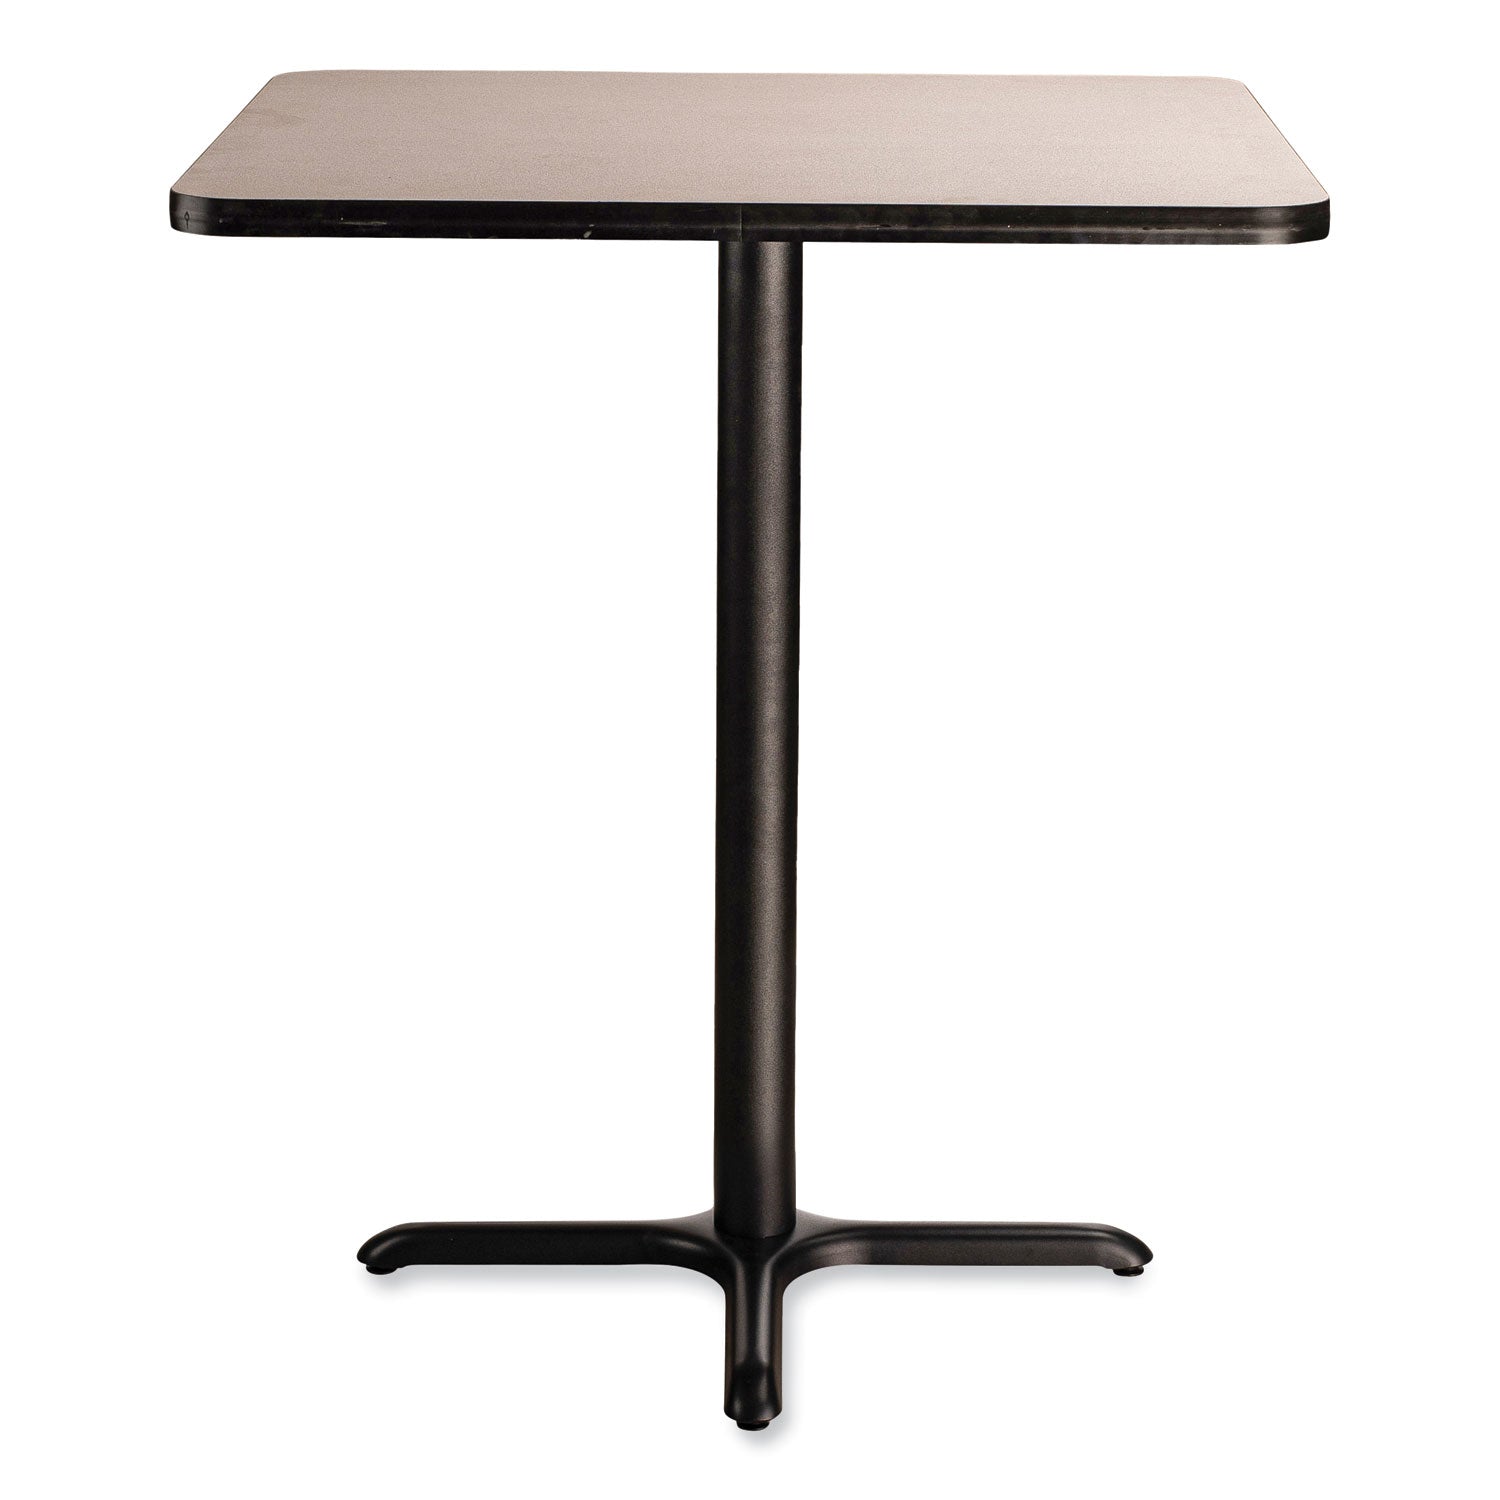 cafe-table-36w-x-36d-x-30h-square-top-x-base-gray-nebula-top-black-base-ships-in-7-10-business-days_npsct33636xd1gy - 2